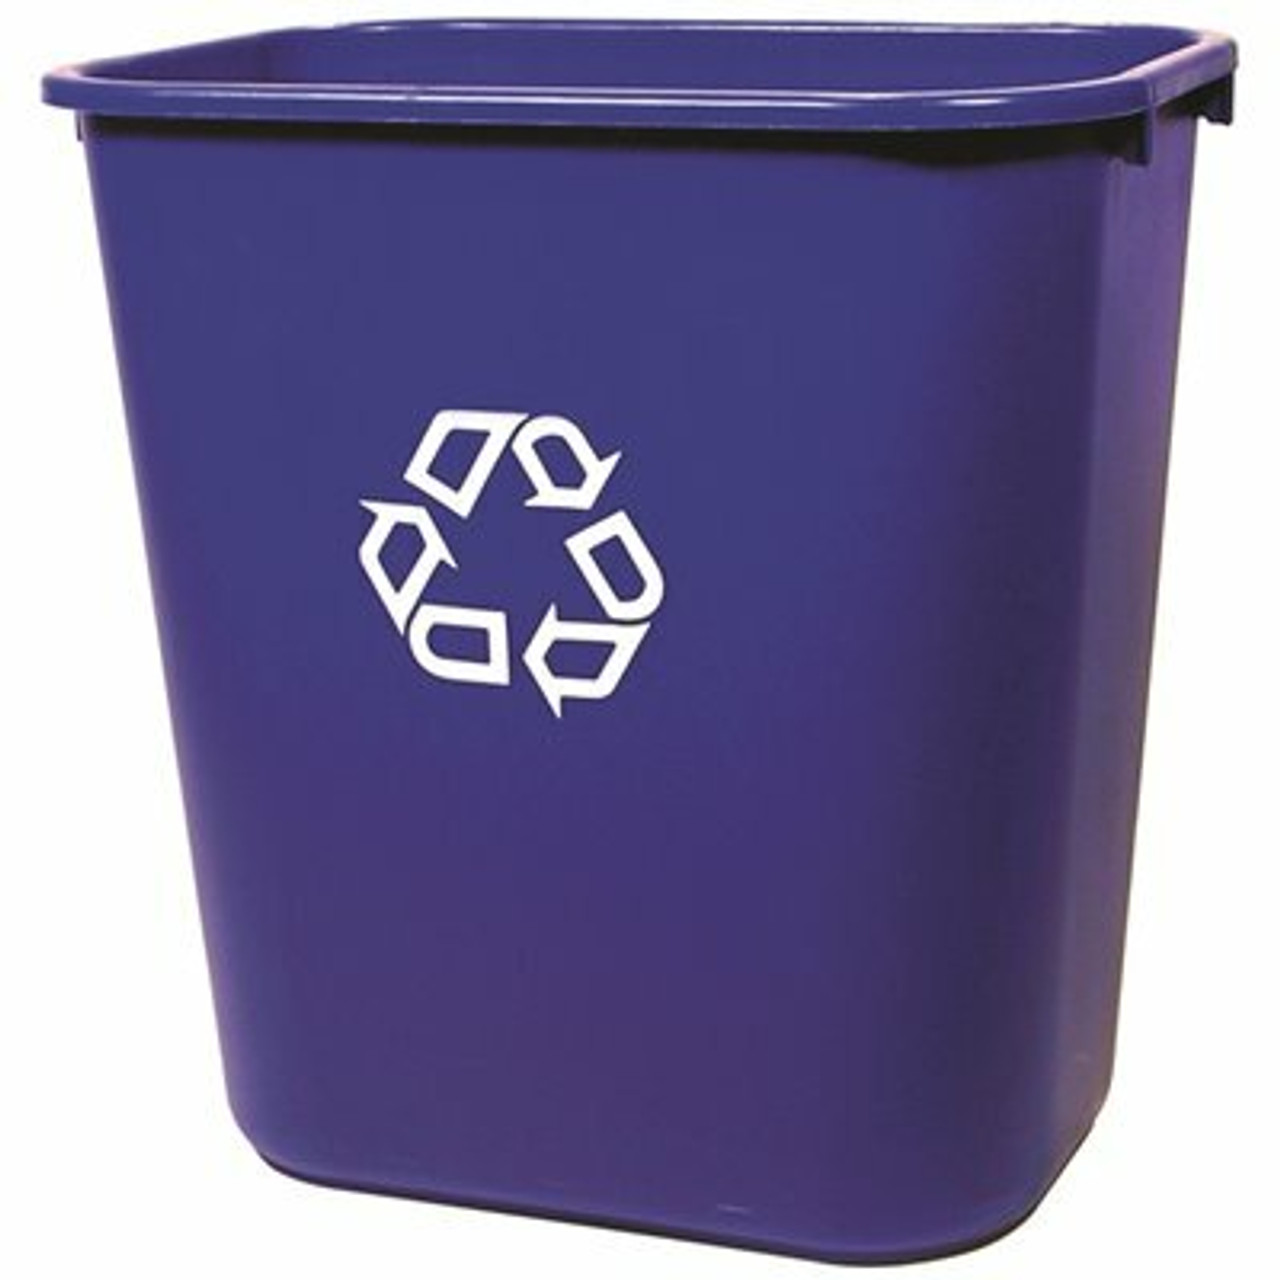 Rubbermaid Commercial Products 7 Gal. Deskside Recycling Trash Container/Bin